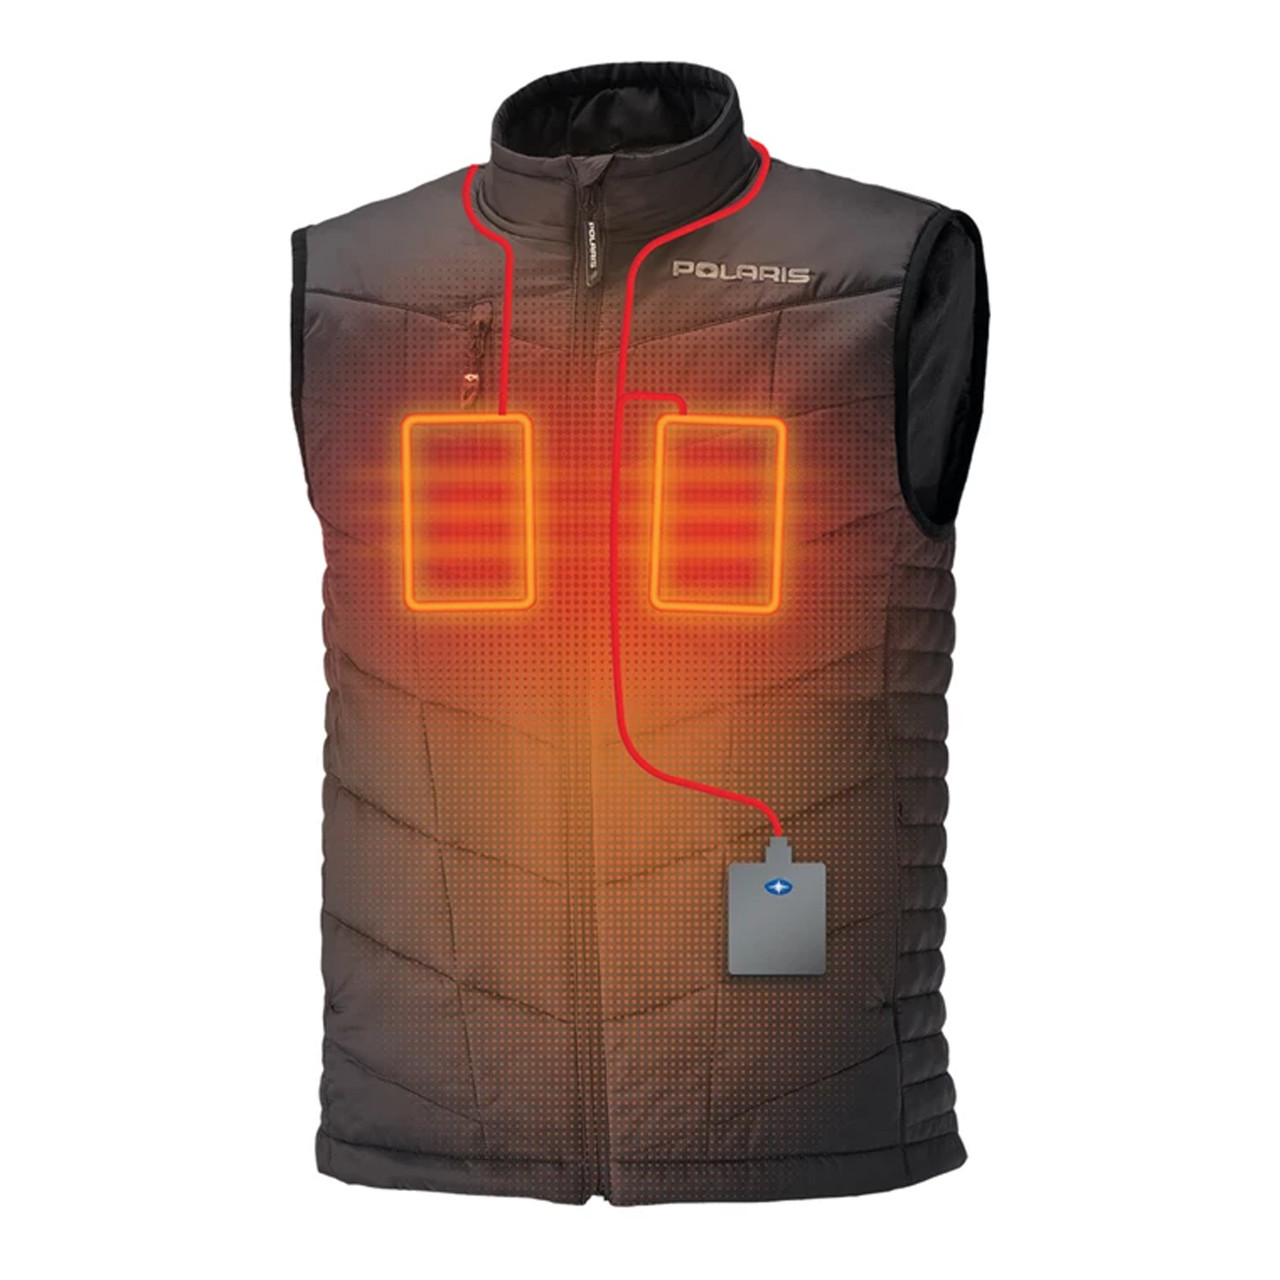 Polaris Snowmobile New OEM, Adult Men's Med, Heated Vest with Battery,286144103